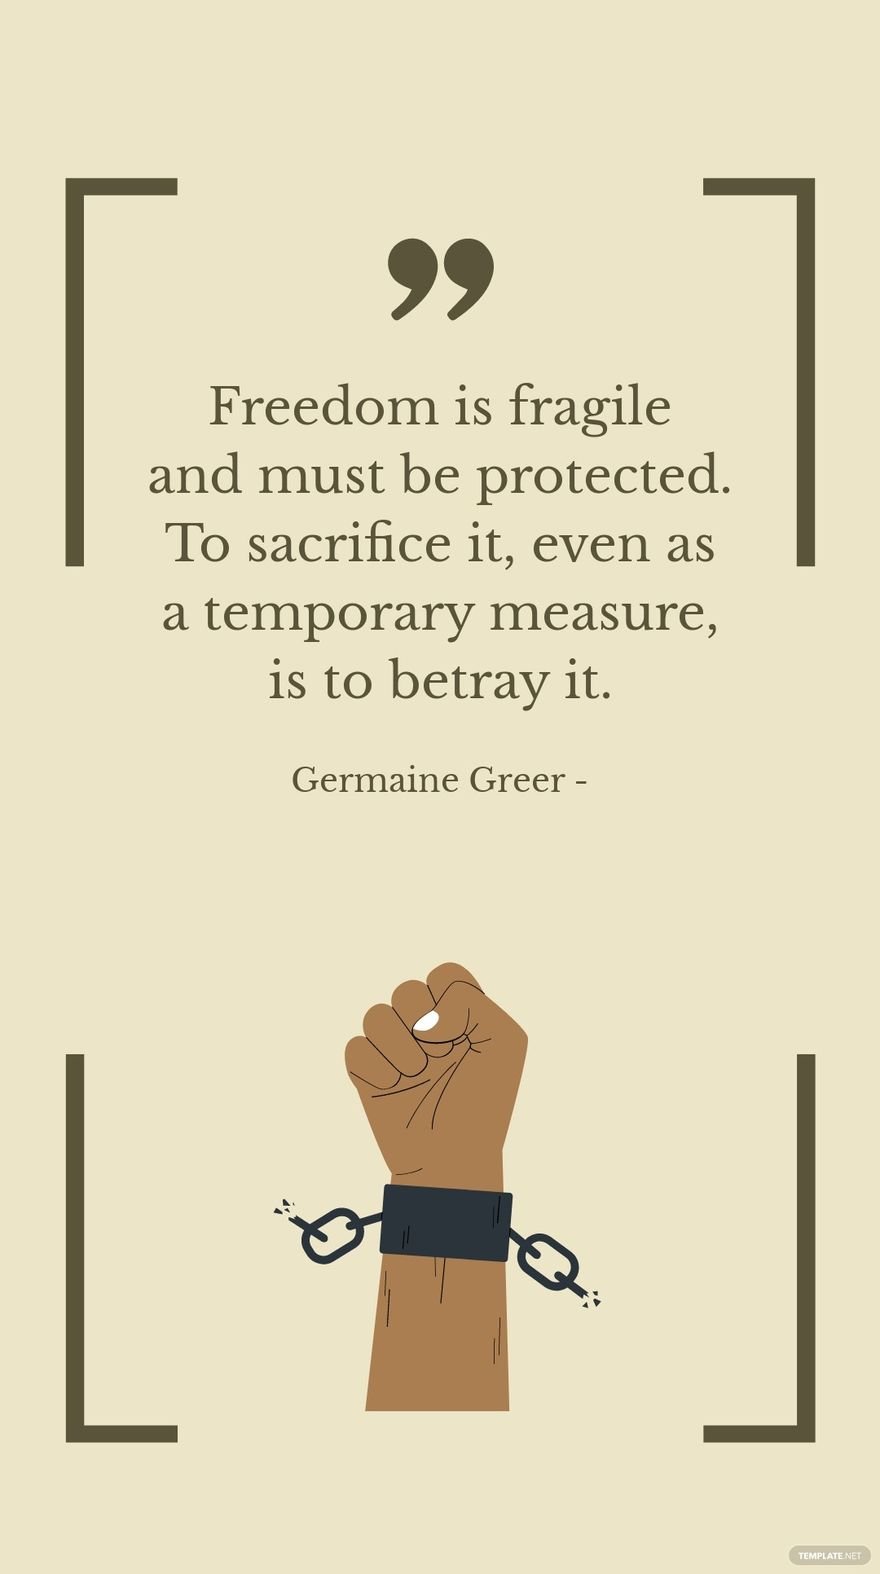 Germaine Greer - Freedom is fragile and must be protected. To sacrifice it, even as a temporary measure, is to betray it.